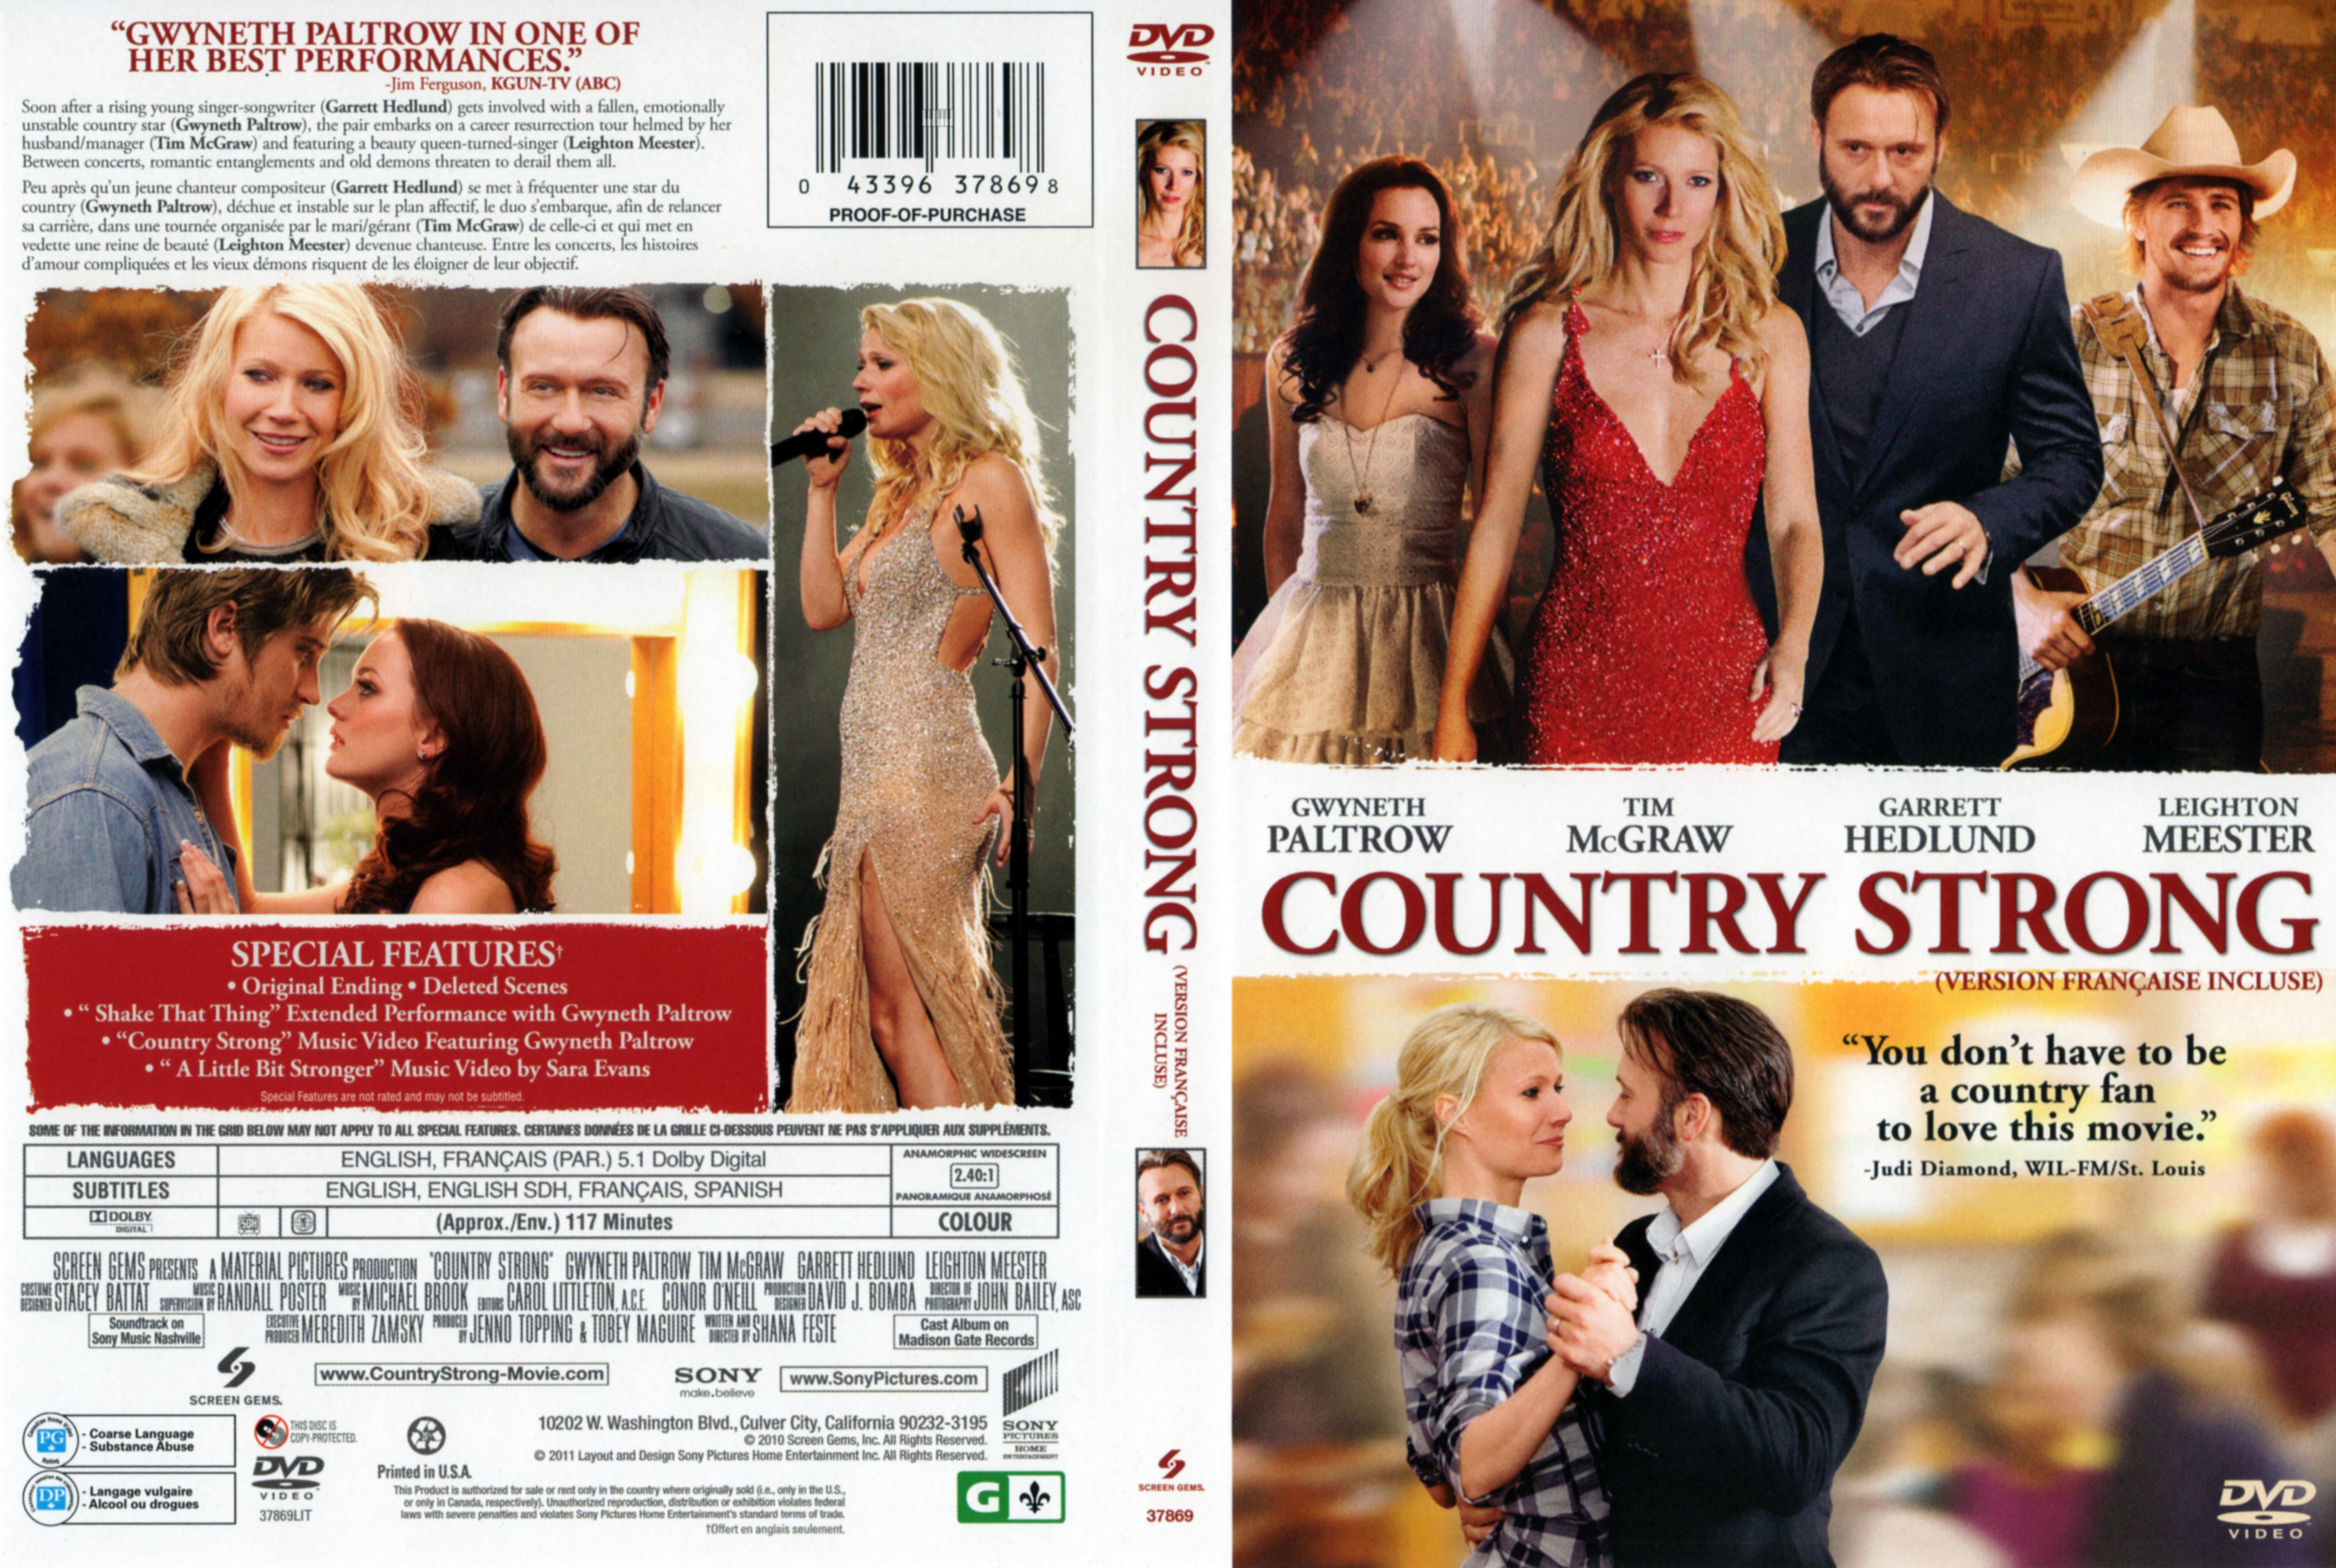 Jaquette DVD Country strong (Canadienne)